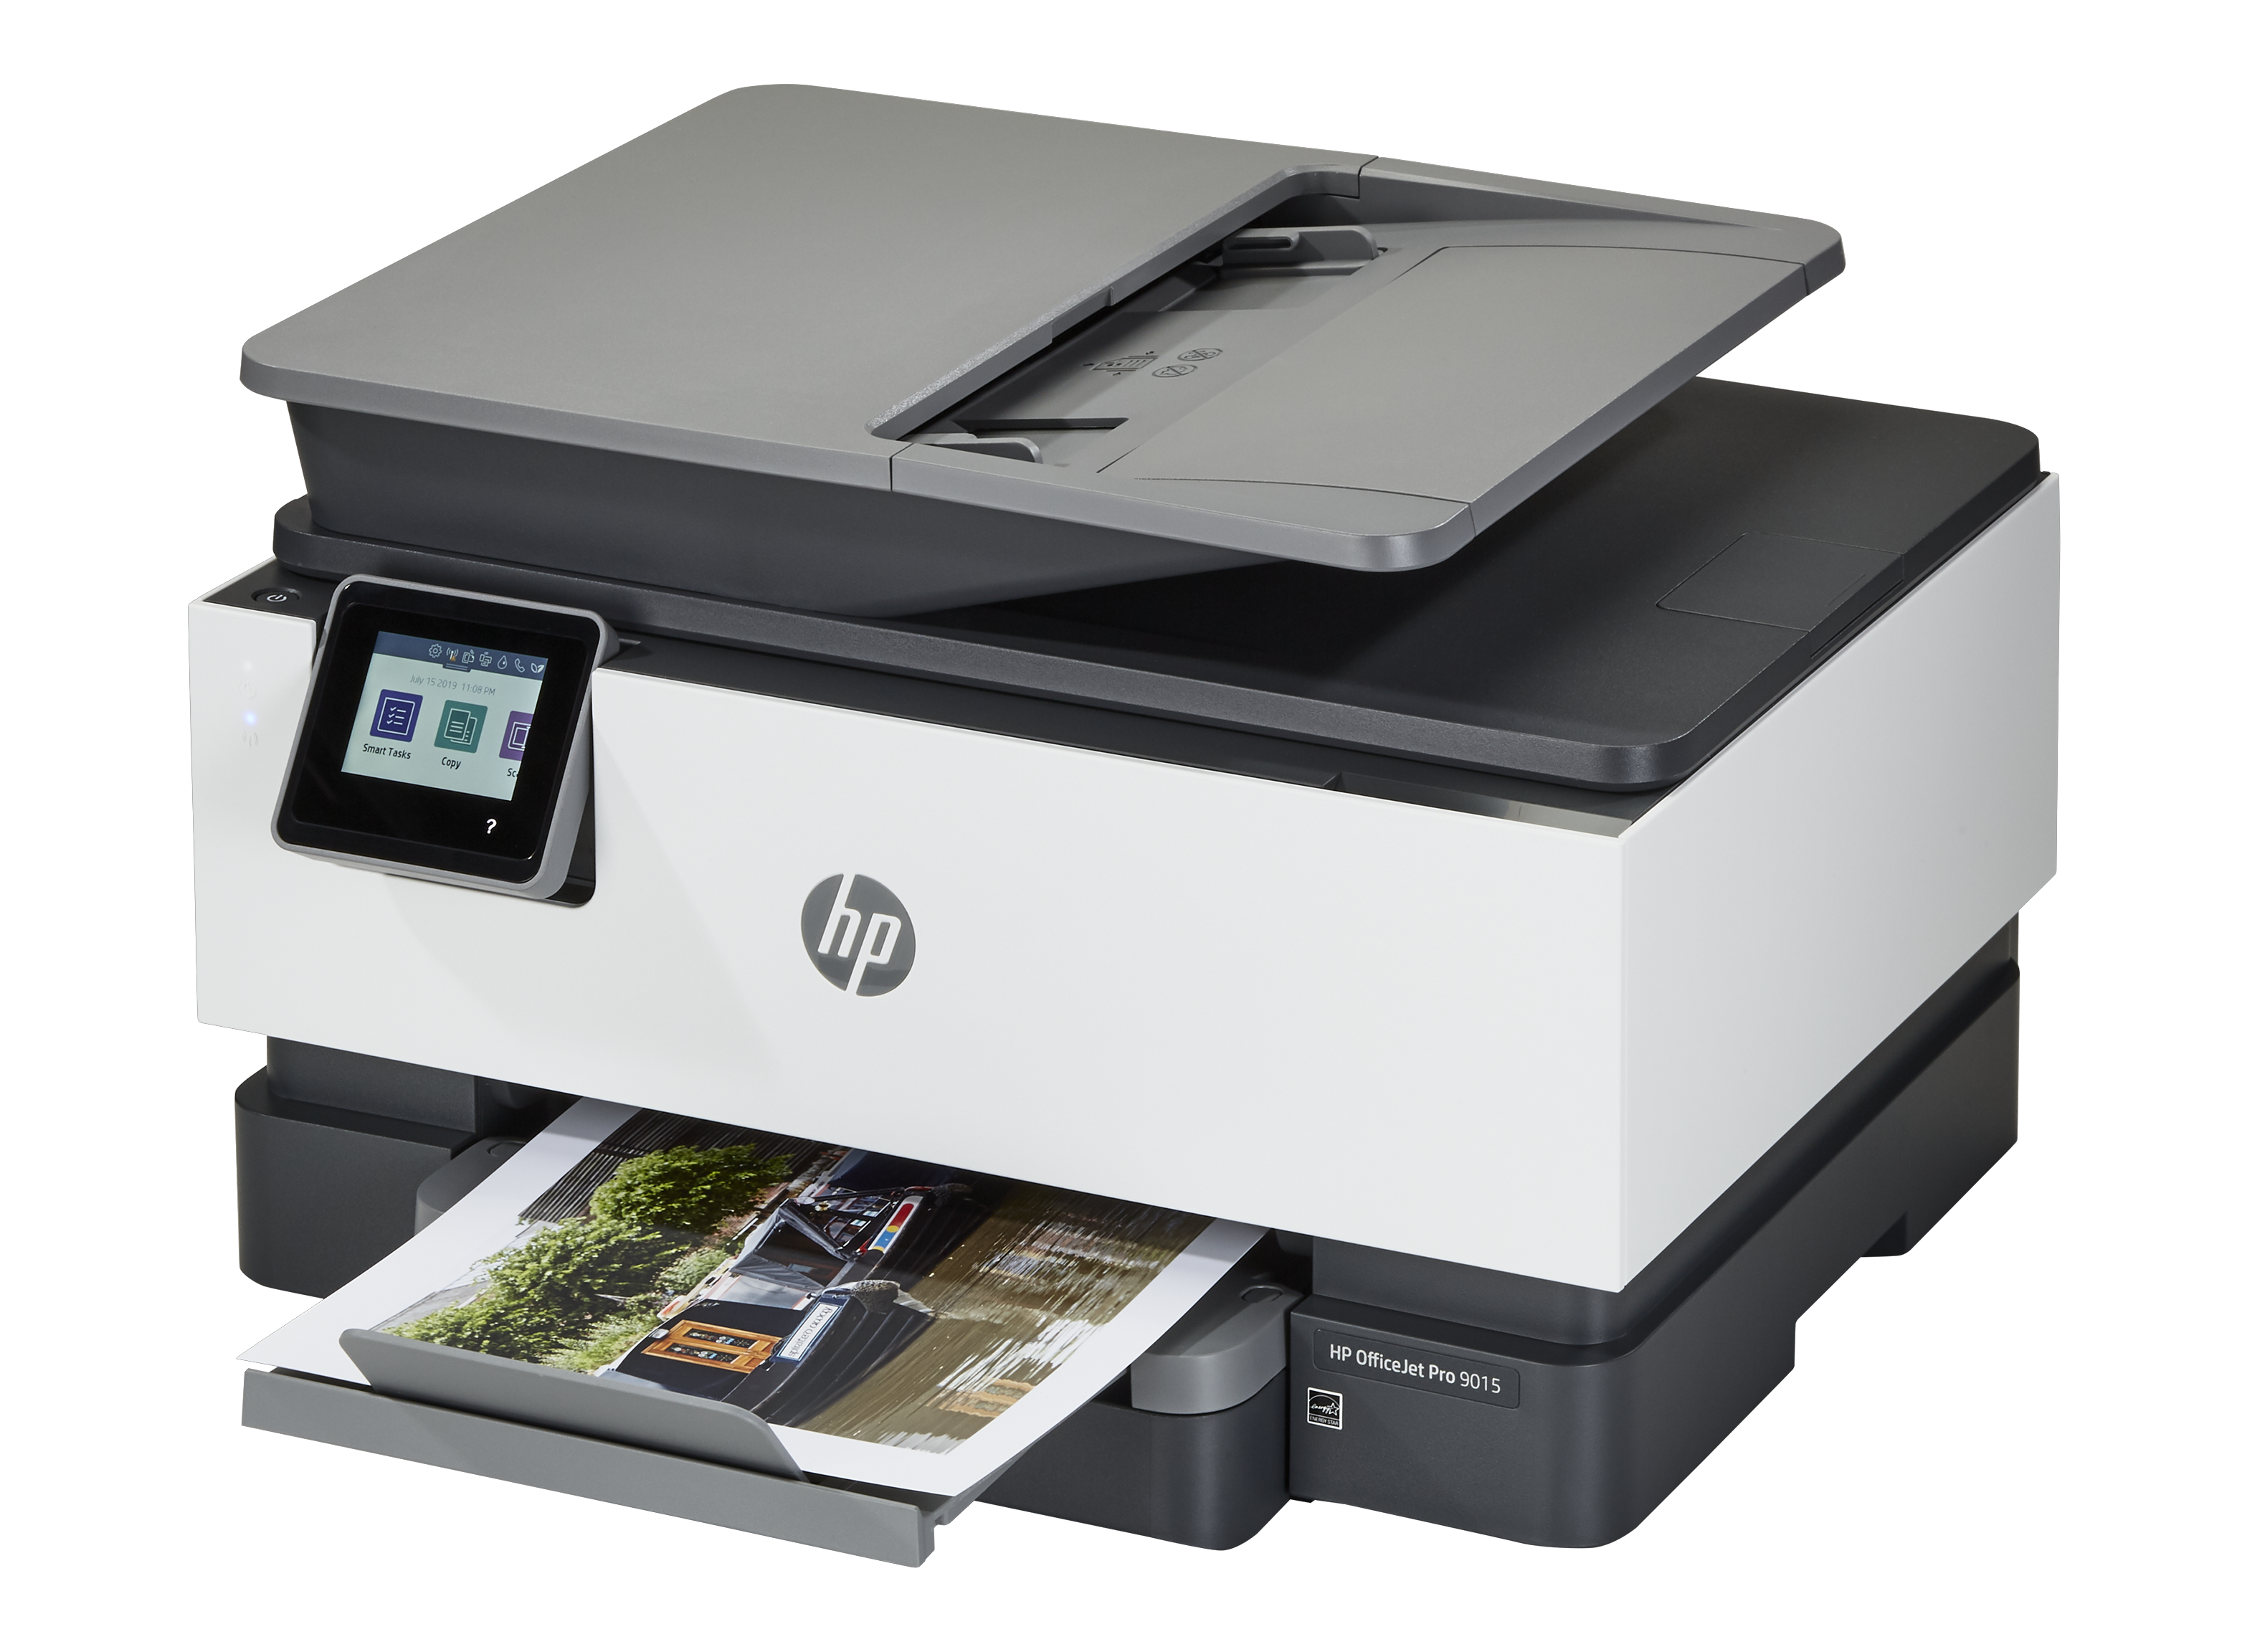 HP Officejet Pro 7740 Printer Review - Consumer Reports